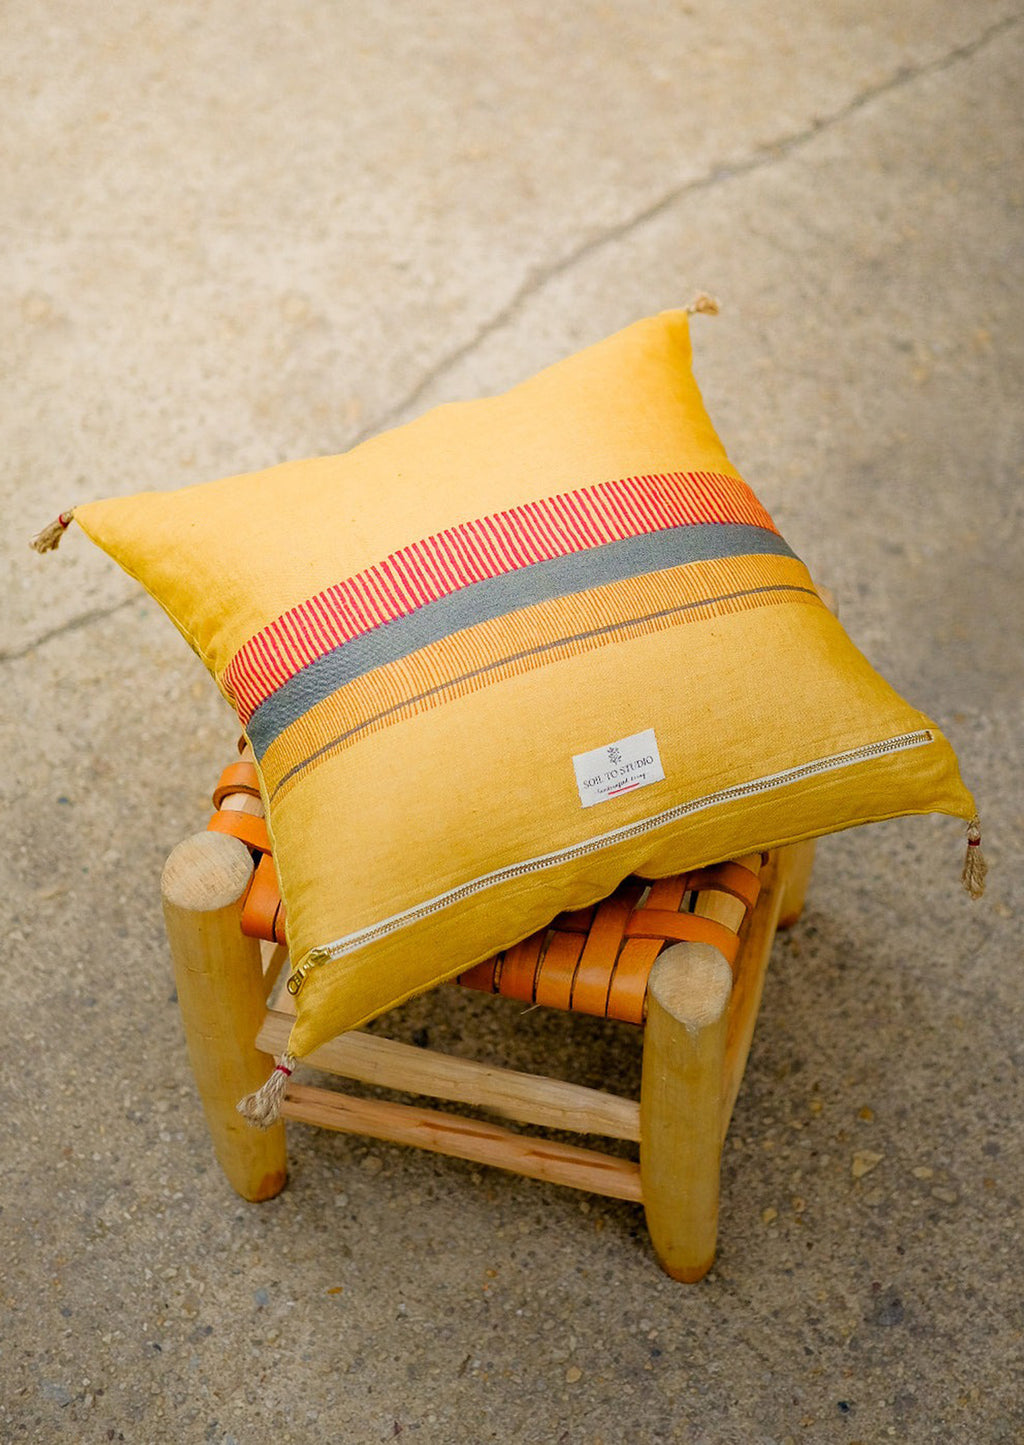 2: The back of the pillow with decorative stripe detailing and zip closure.